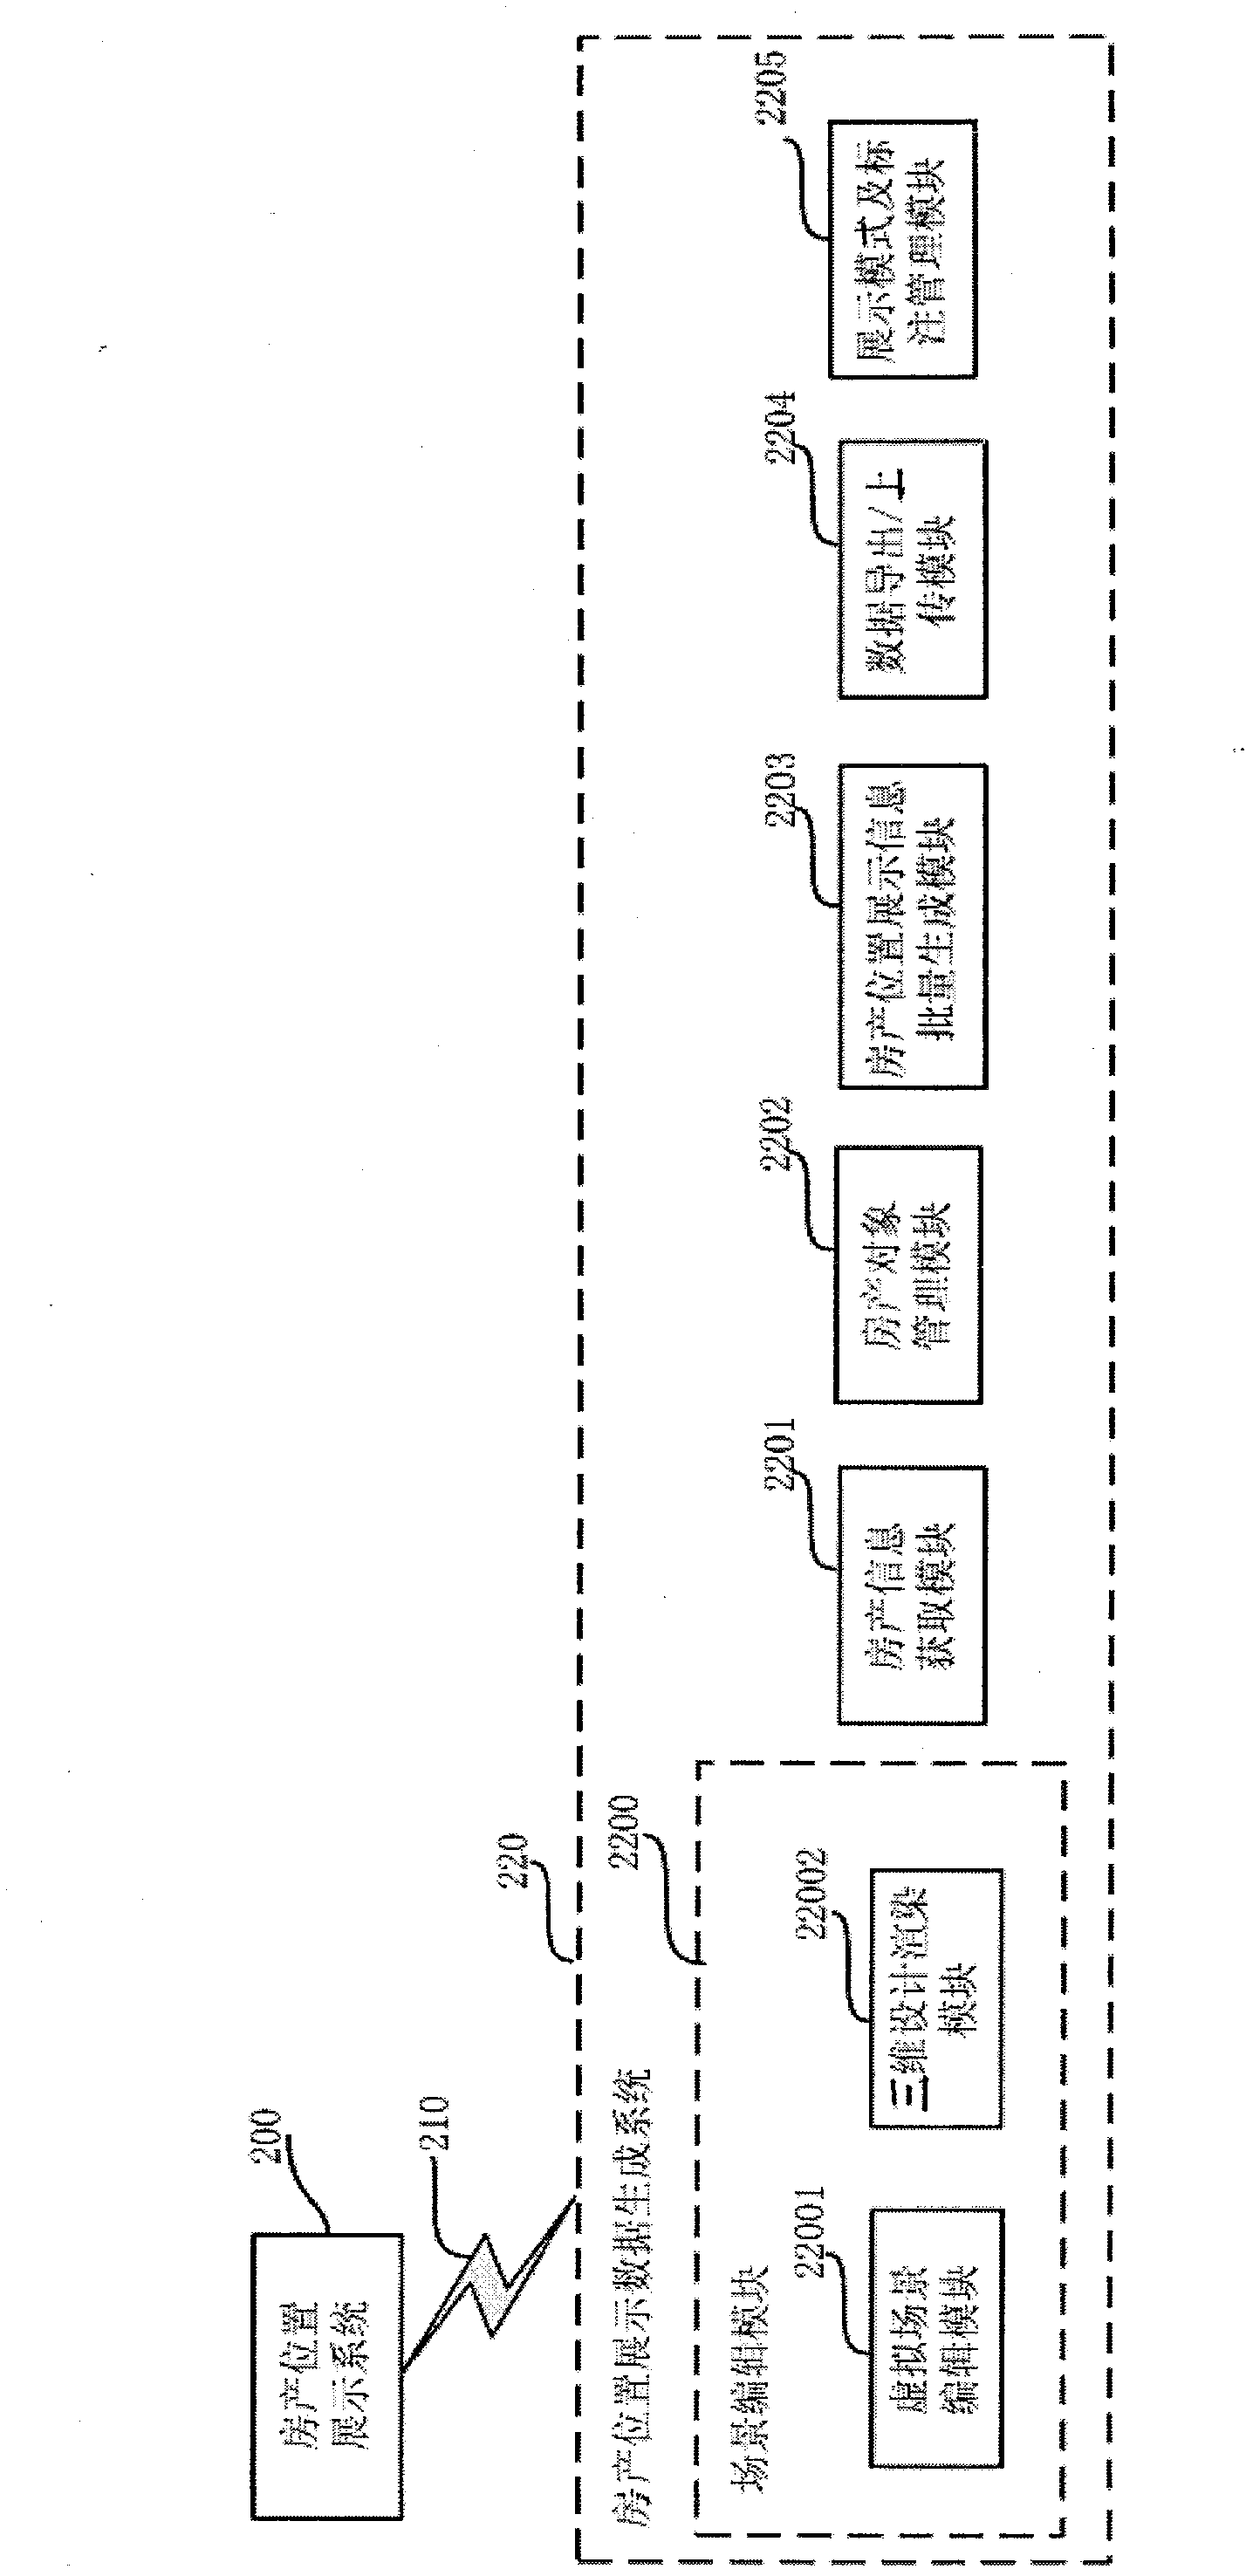 House position display system, house position display method, house position display data generation system and house position display data generation method